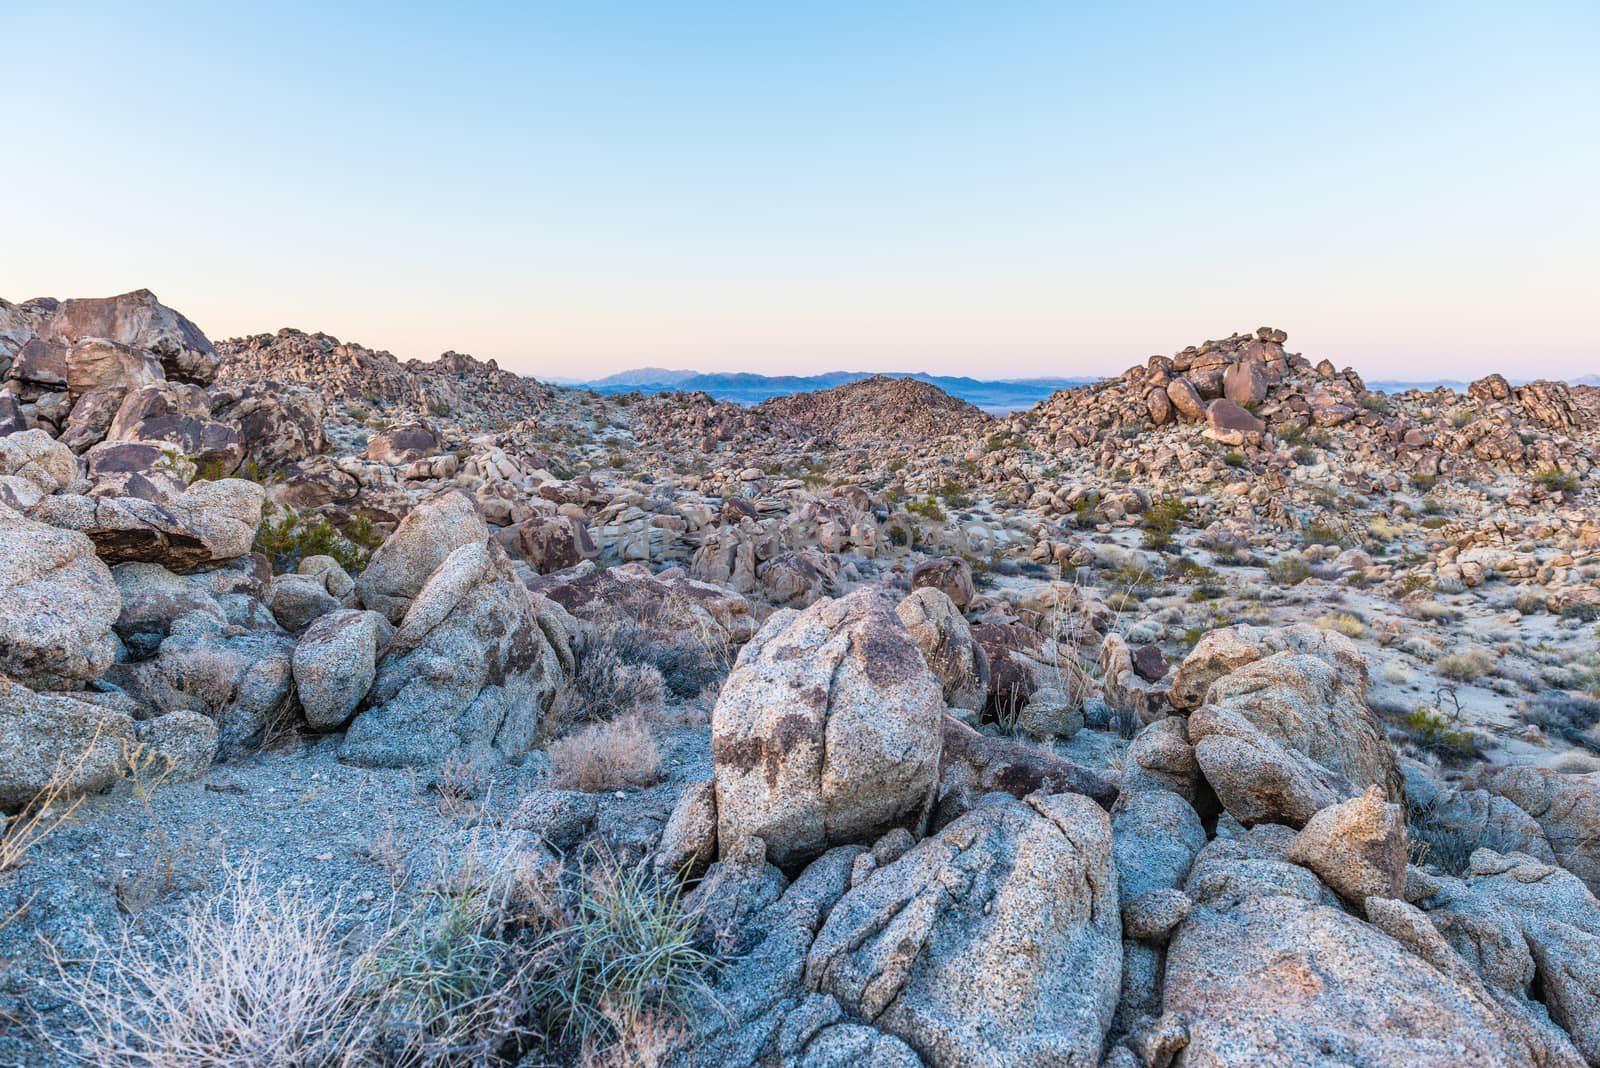 Dusk in the Porcupine Wash wilderness area in Joshua Tree Nation by Njean